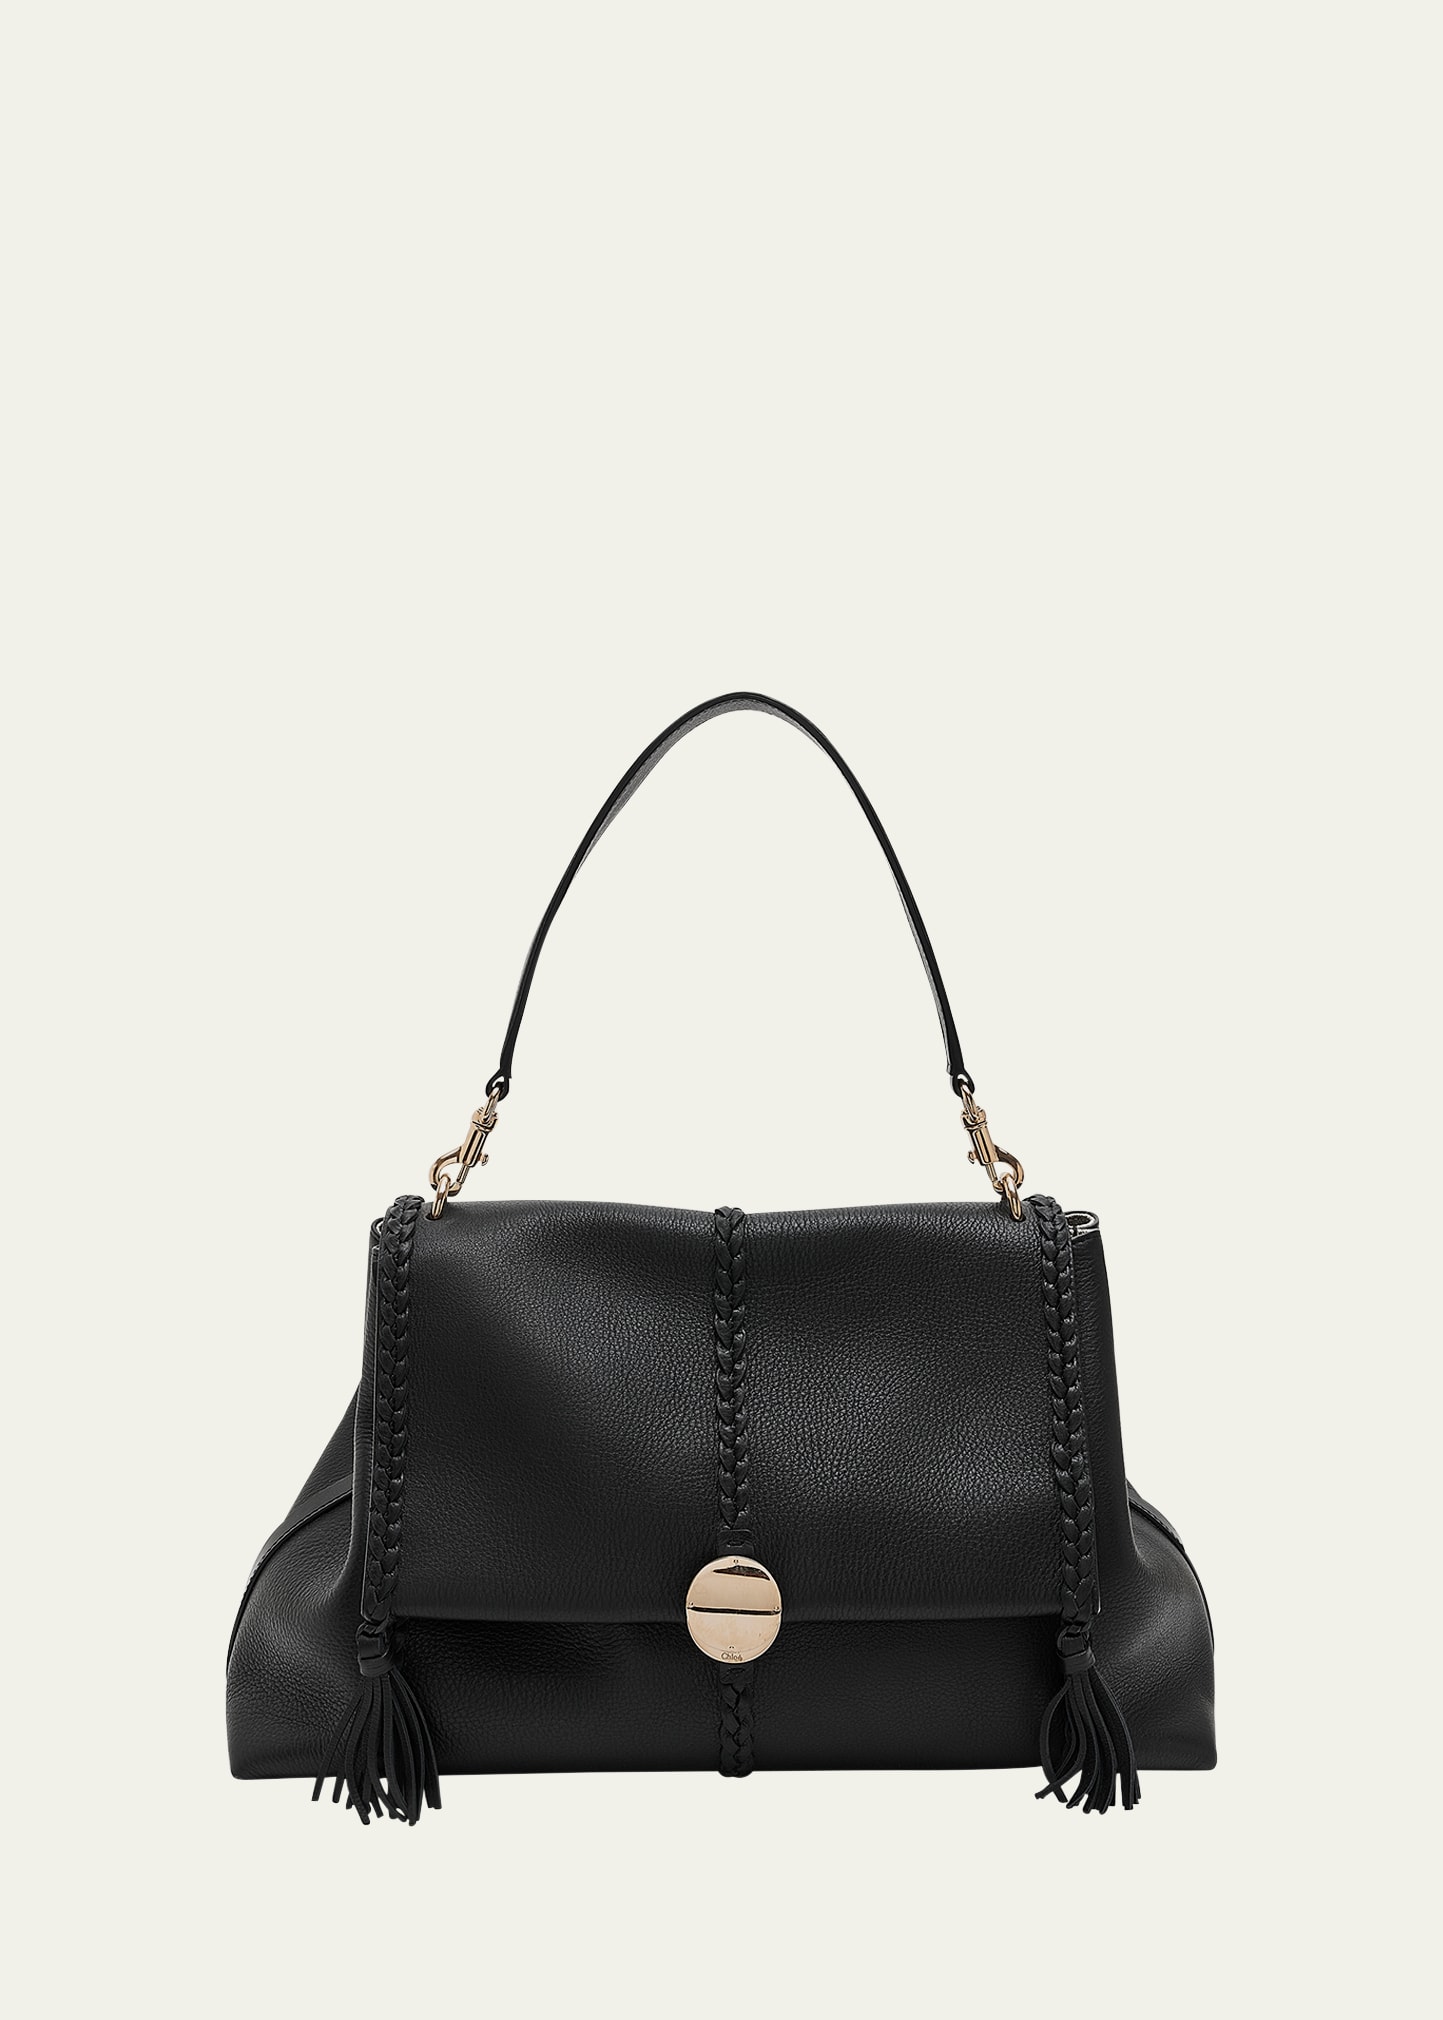 Chloé Penelope Medium Top-handle Bag In Smooth Grained Leather In Black